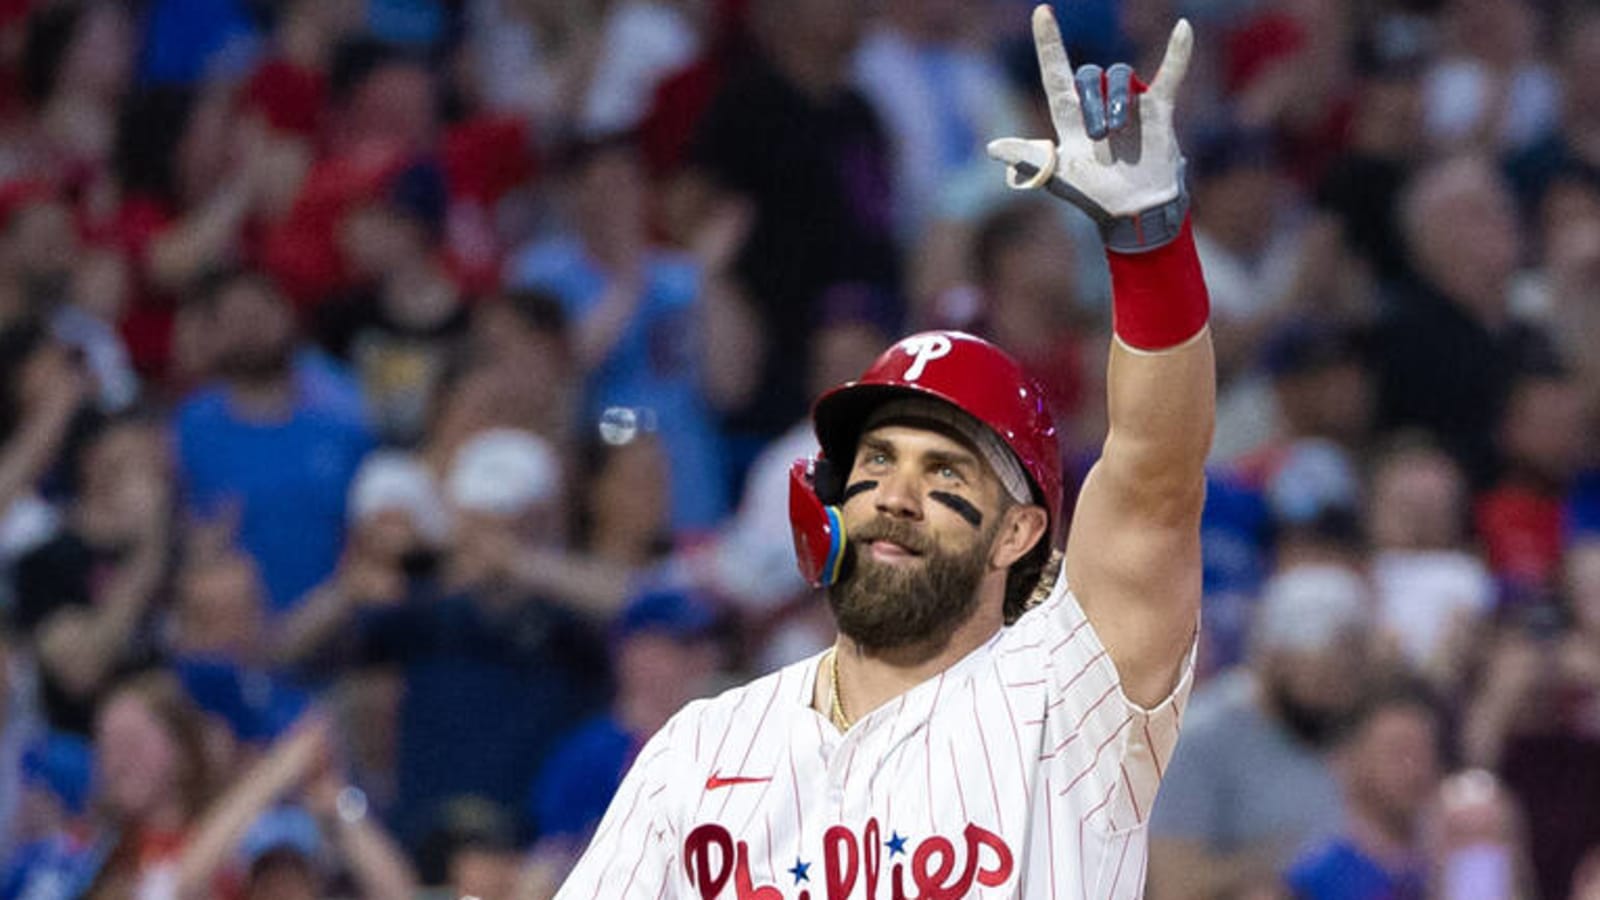 Watch: Phillies' Harper stays hot with another grand slam